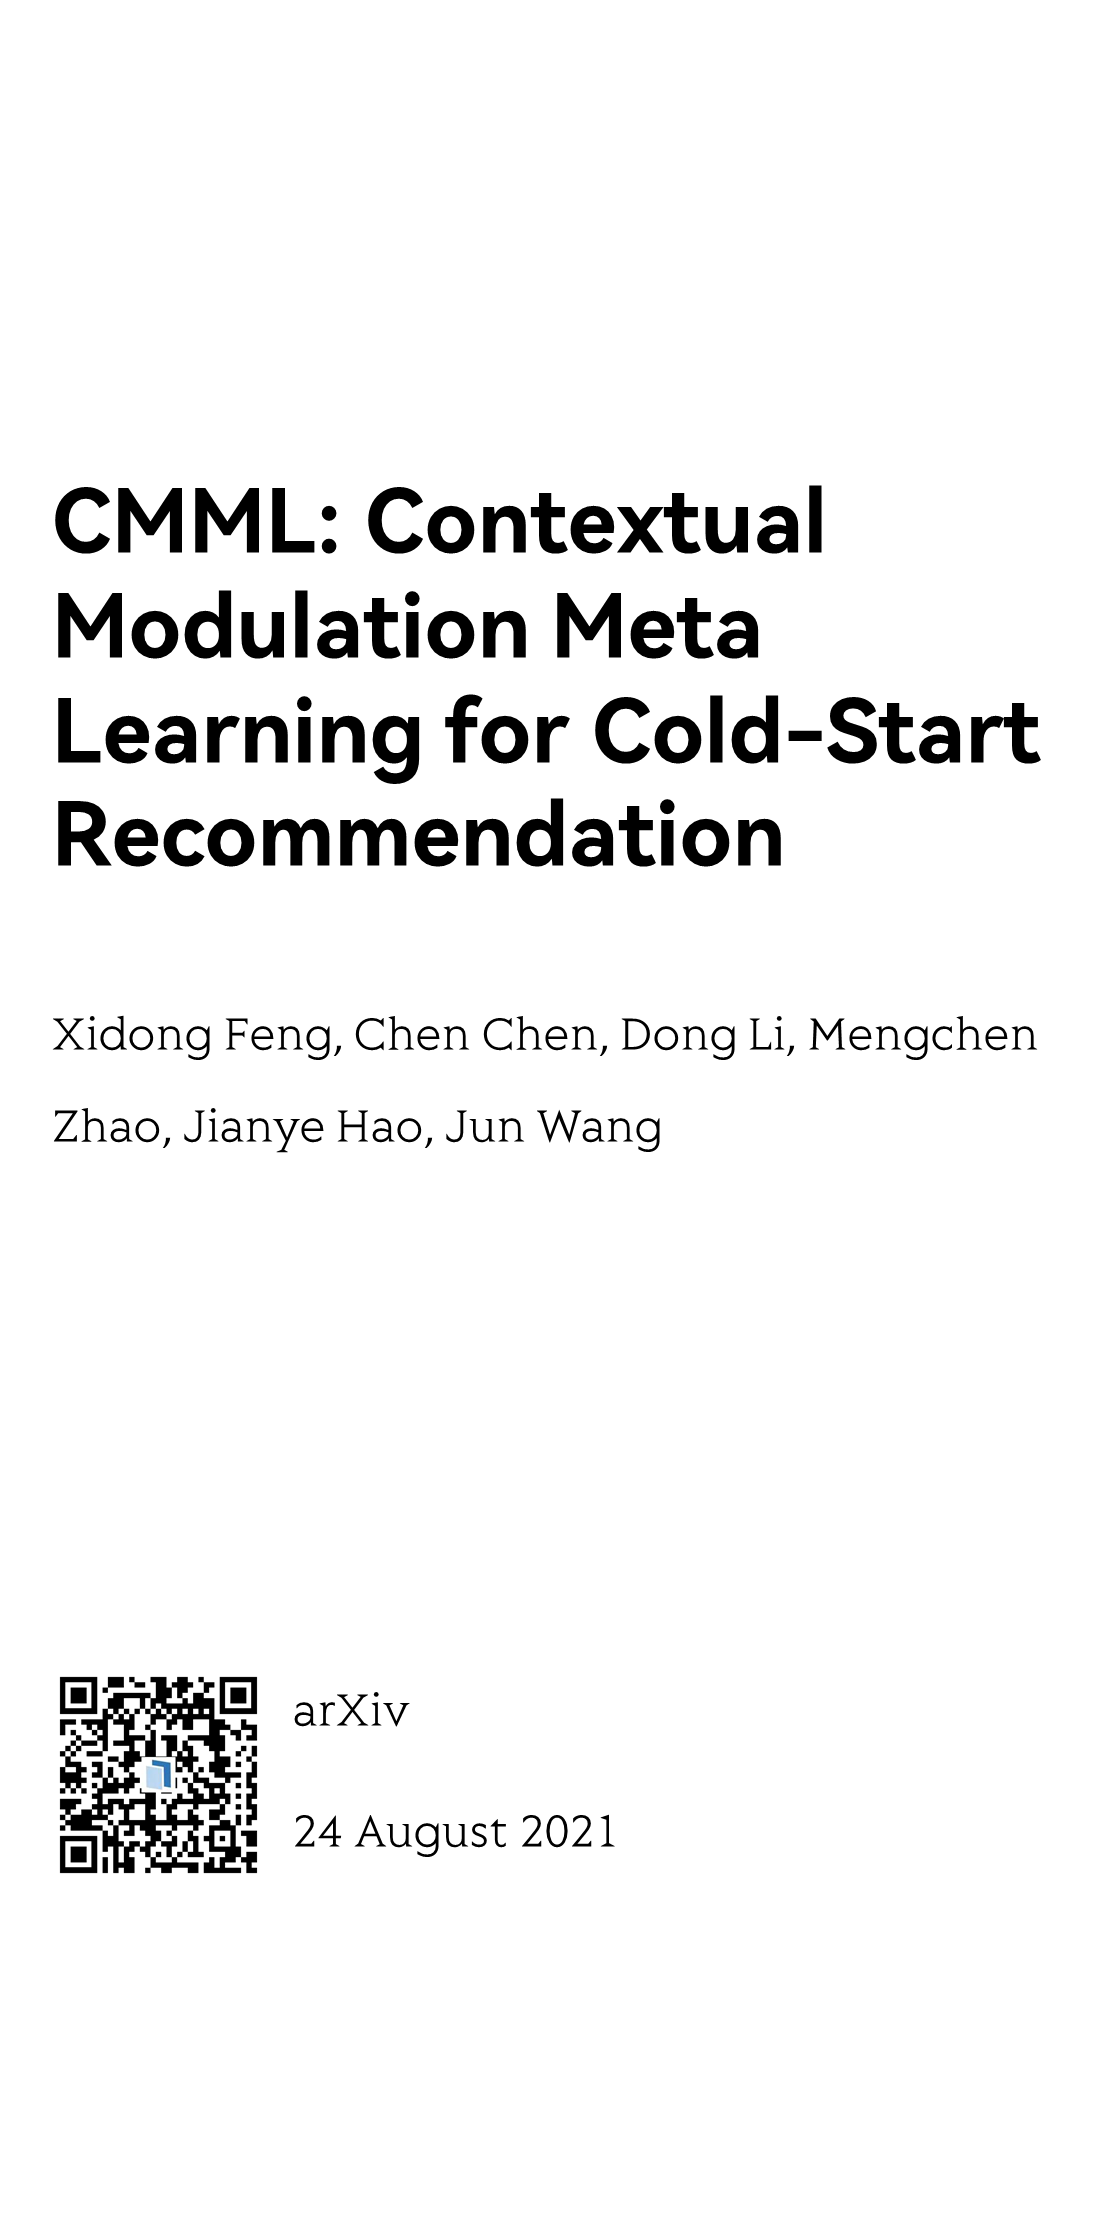 CMML: Contextual Modulation Meta Learning for Cold-Start Recommendation_1